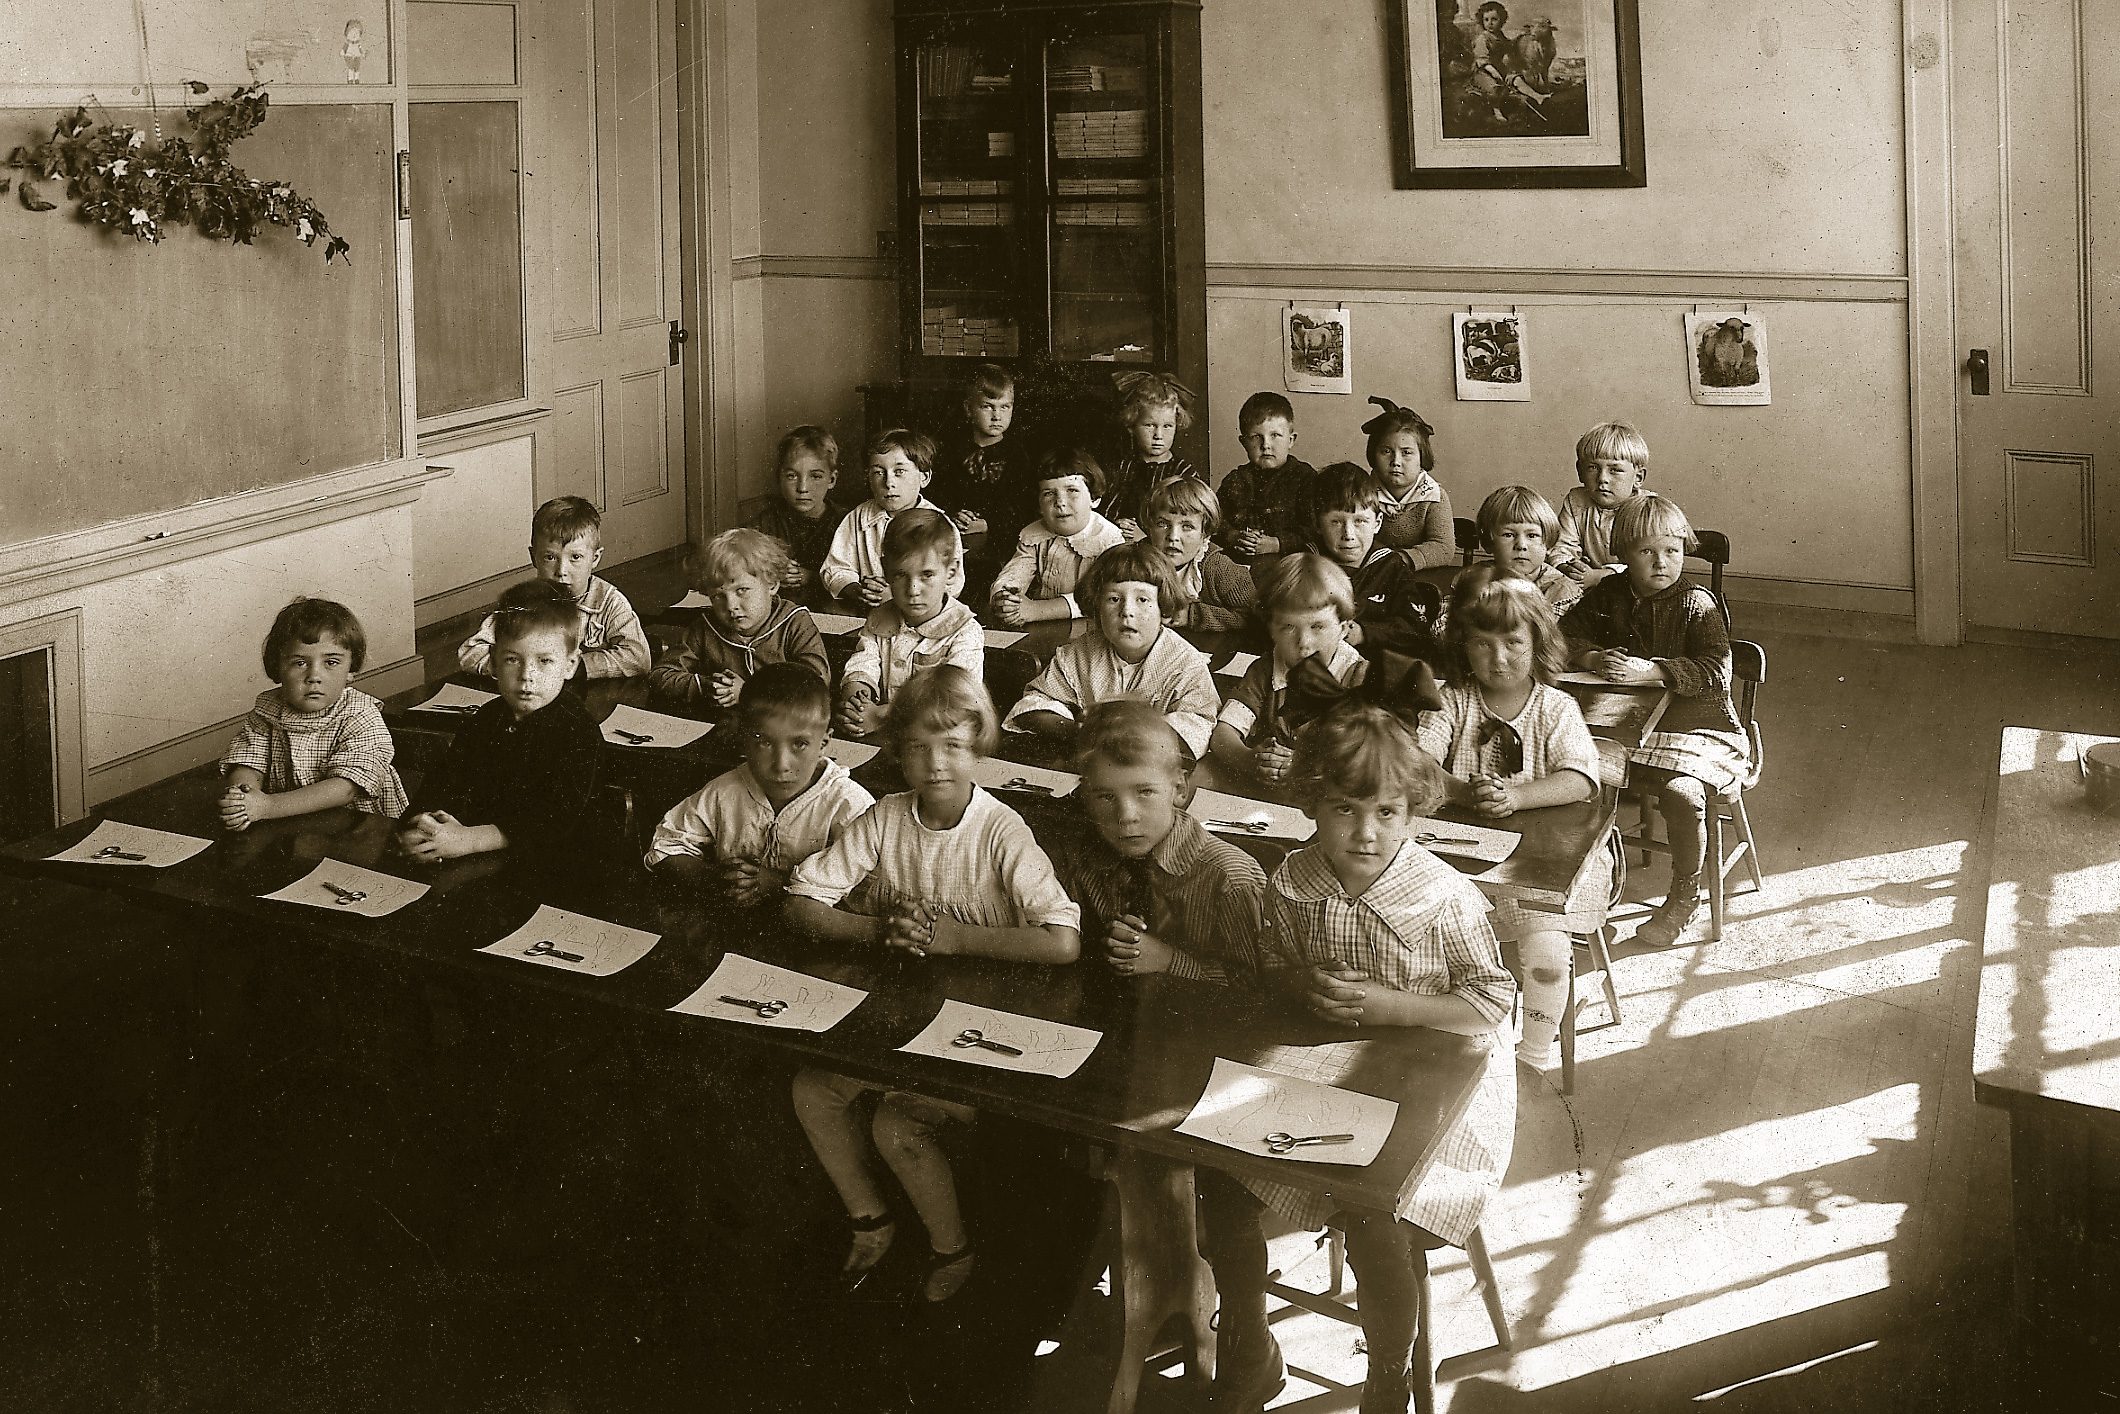 Story of School: A Look into the Many Objects of Public Schooling